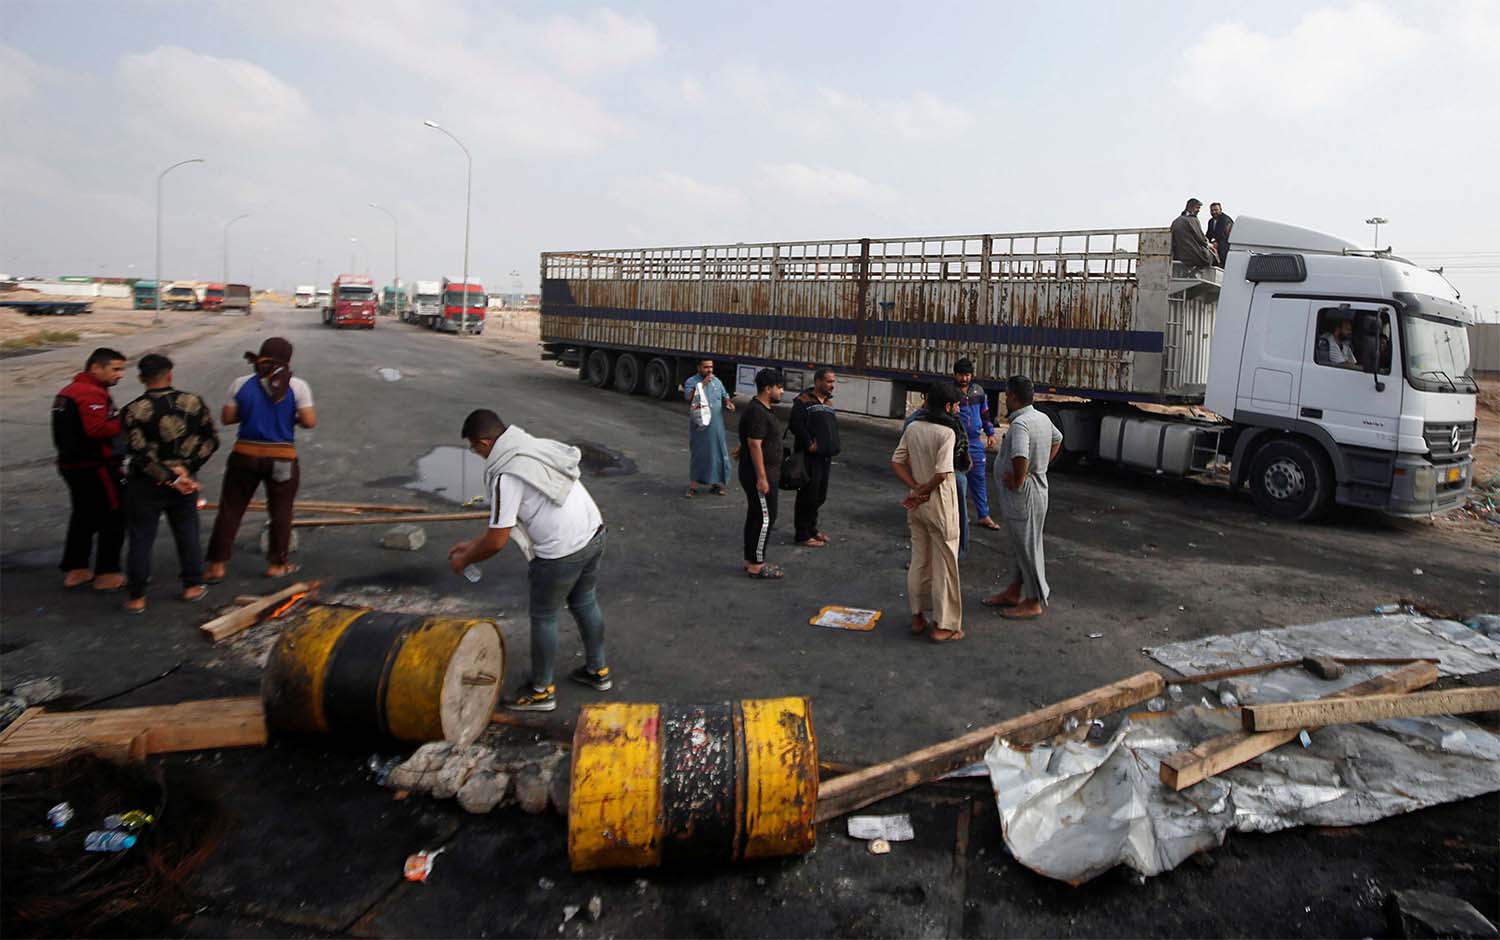 Iraqi demonstrators block the entrance to Umm Qasr Port during the ongoing anti-government protests